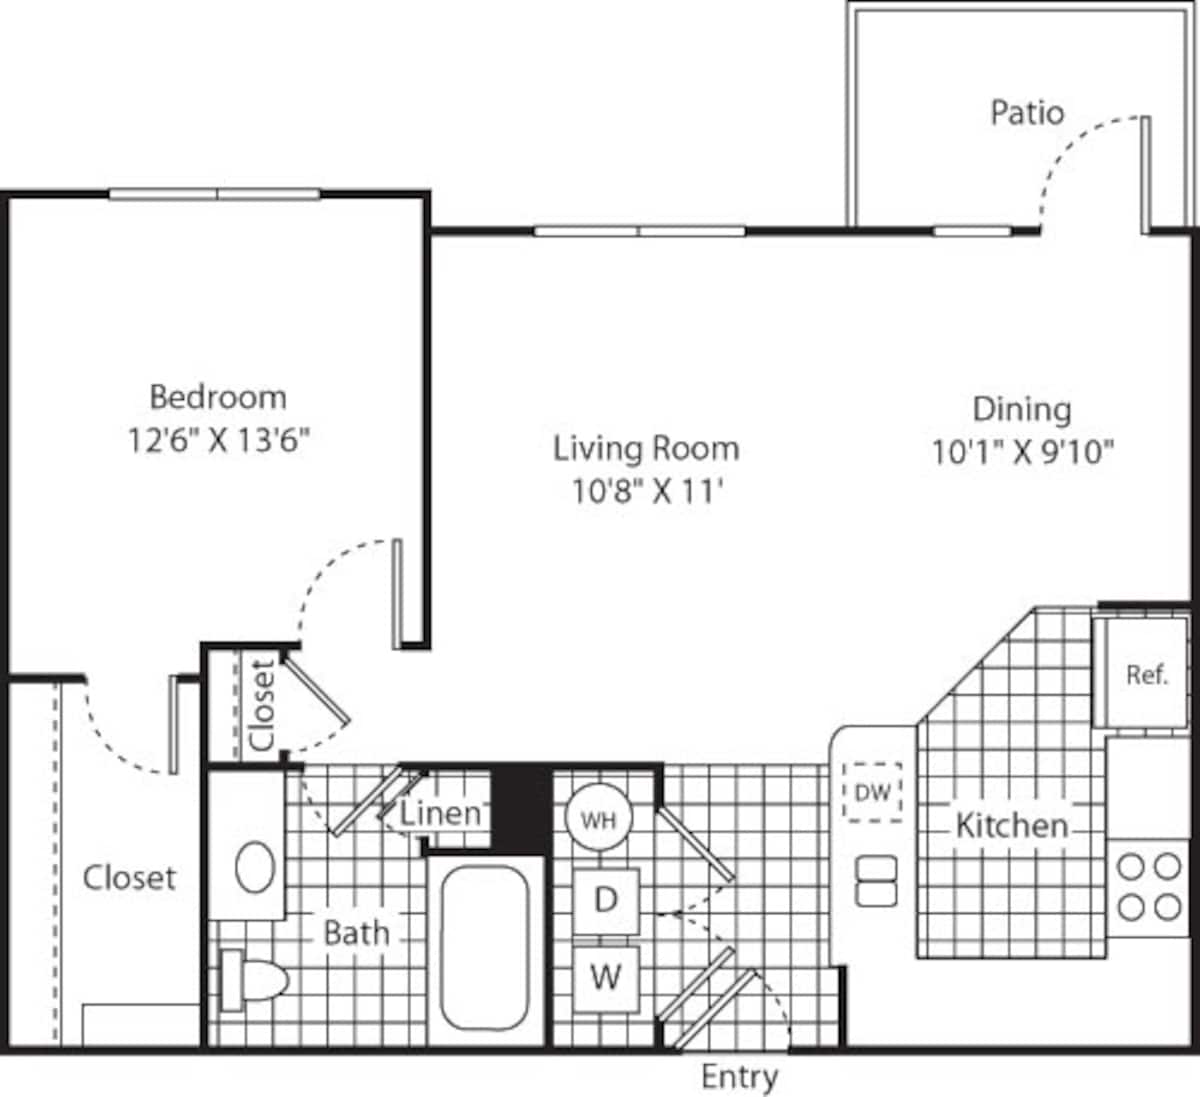 Floorplan diagram for One Bed A-2 - Phase II, showing 1 bedroom